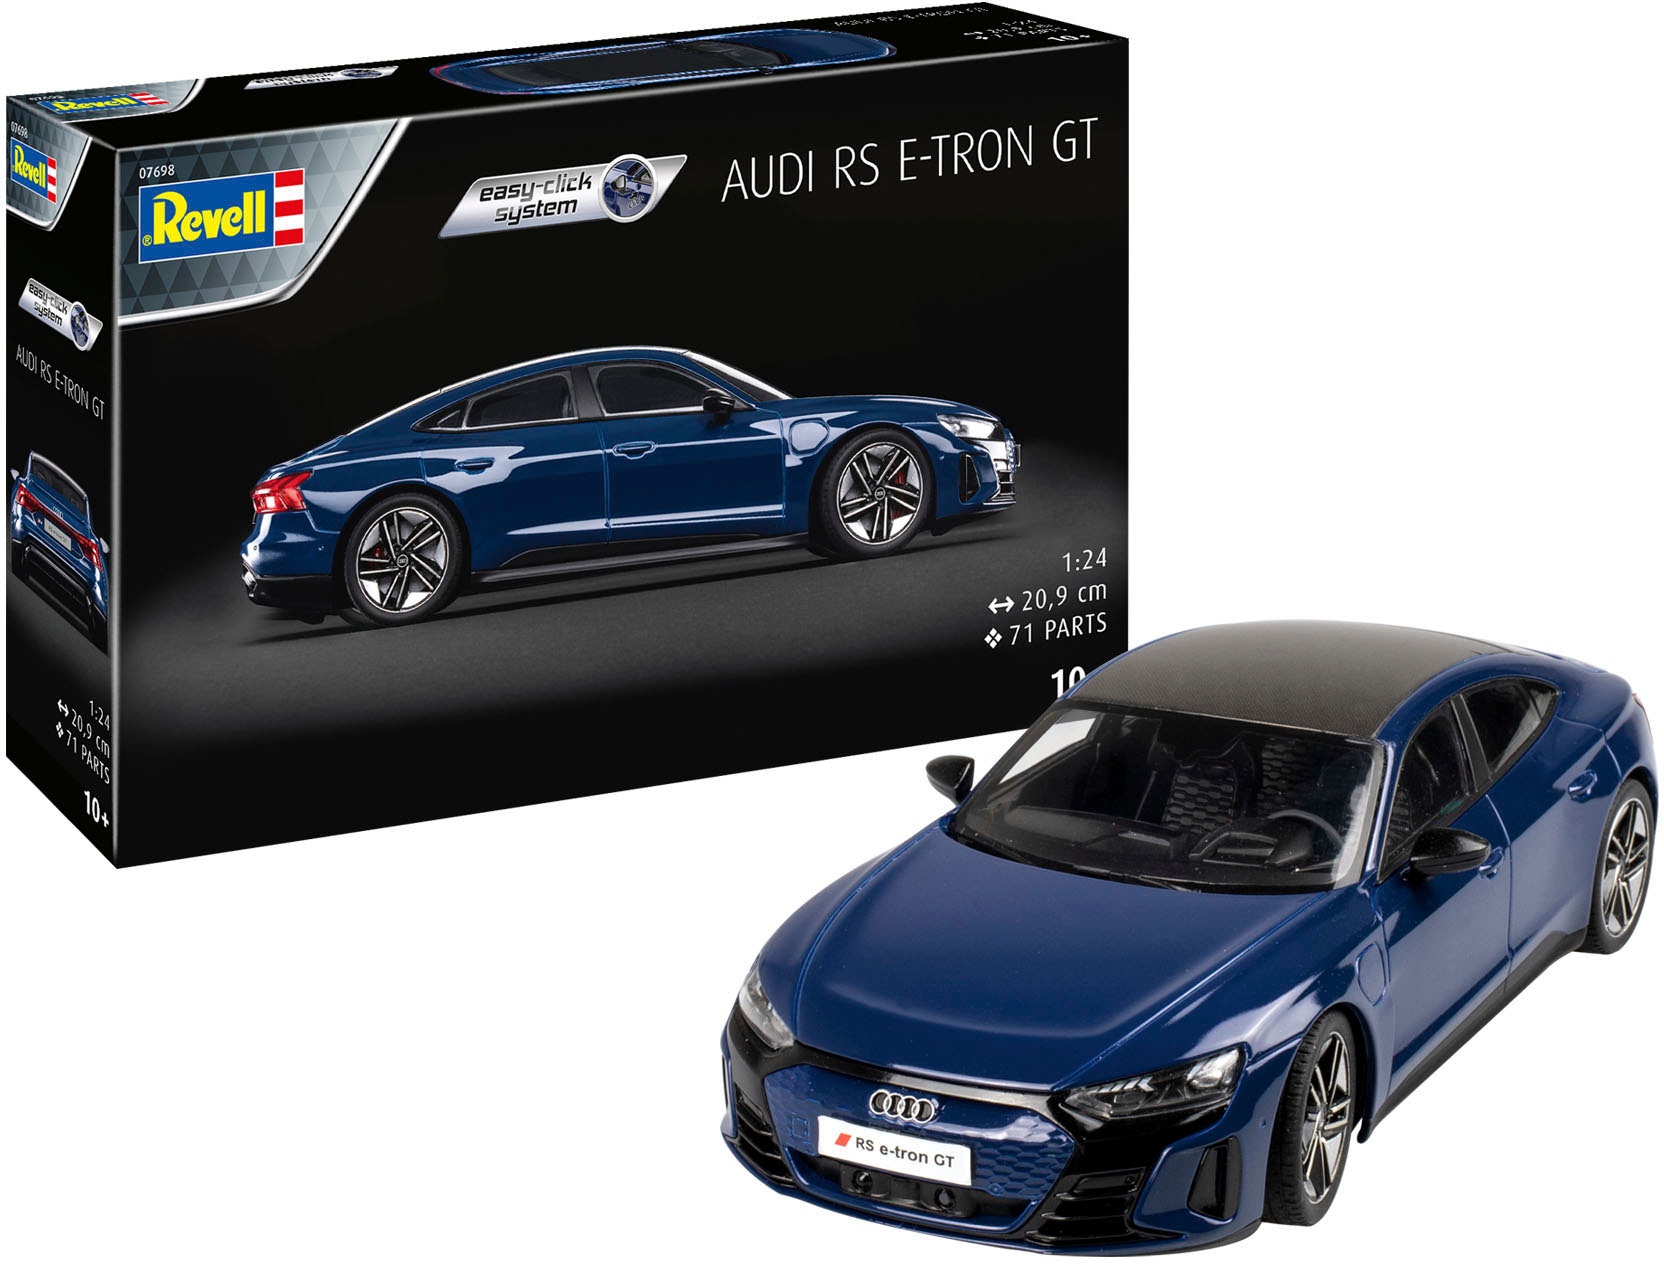 Modellbausatz »Audi RS e-tron GT«, 1:24, Made in Europe